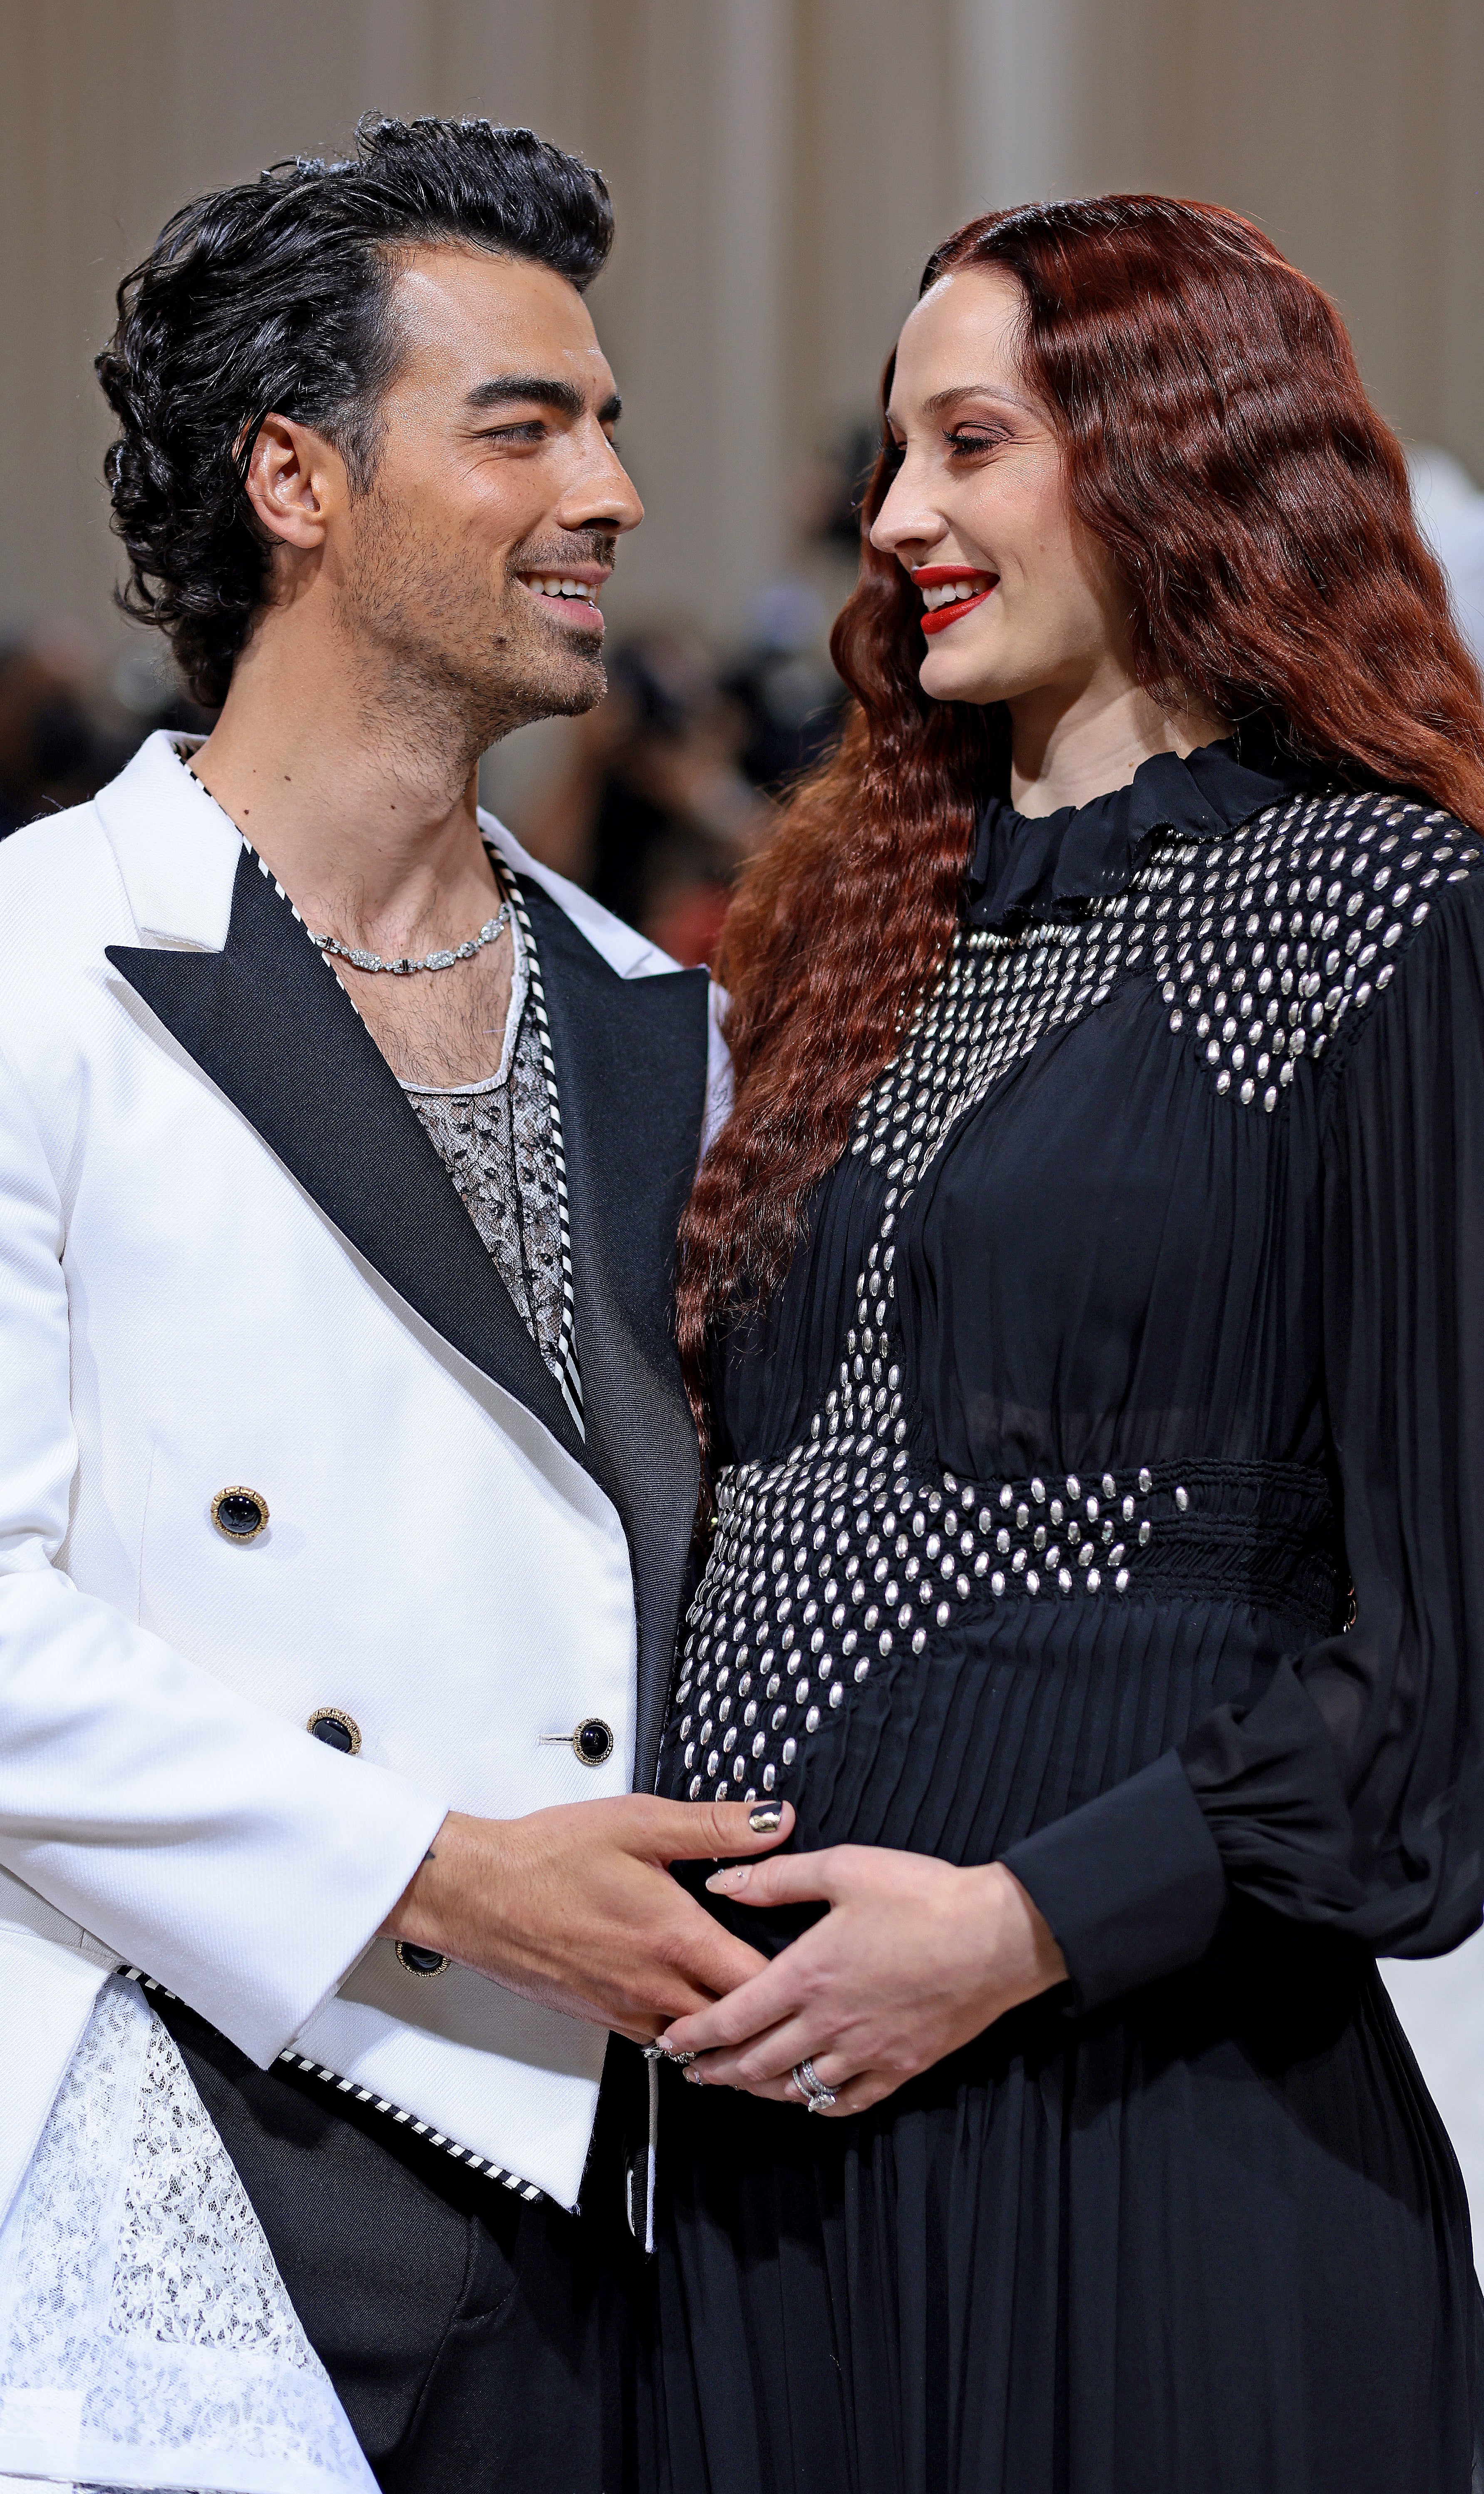 Close-up of Sophie and Joe smiling at each other at a media event